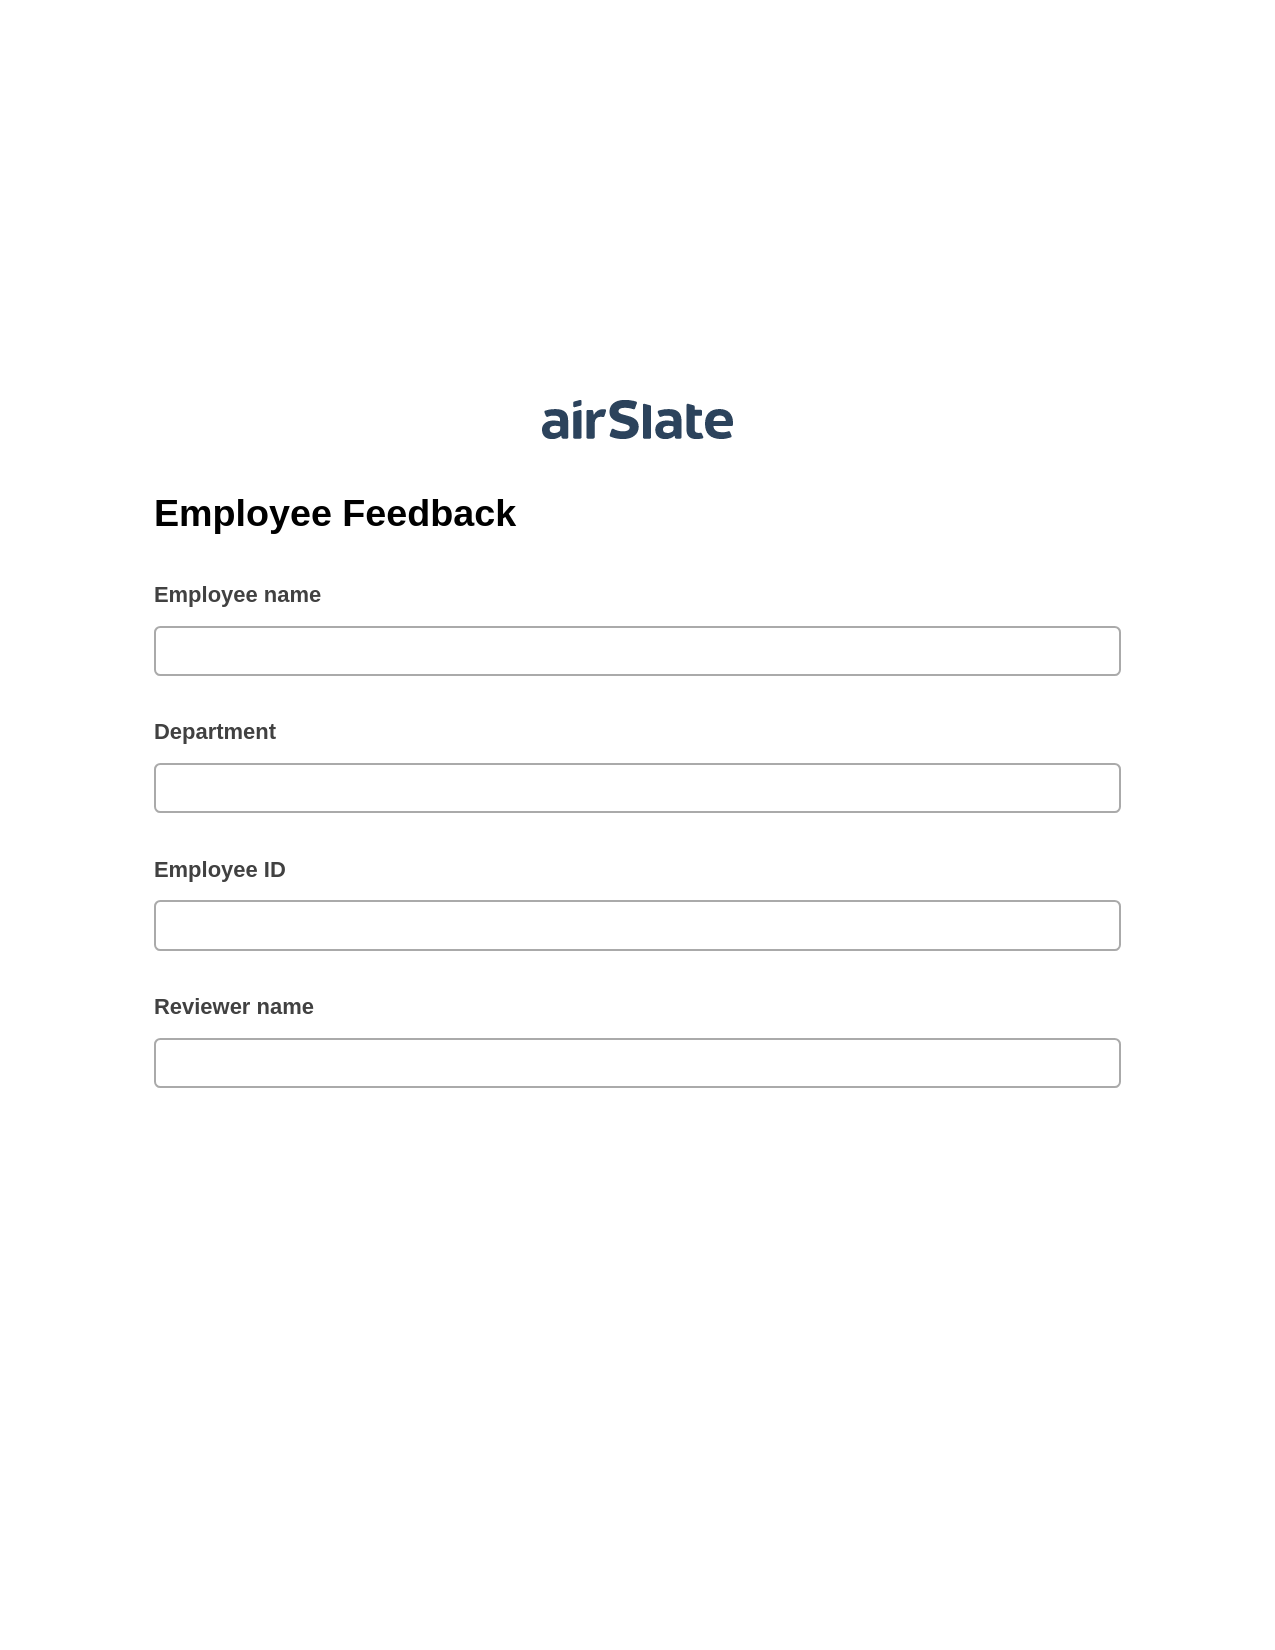 Employee Feedback Pre-fill Slate from MS Dynamics 365 Records Bot, Remove Slate Bot, Export to Smartsheet